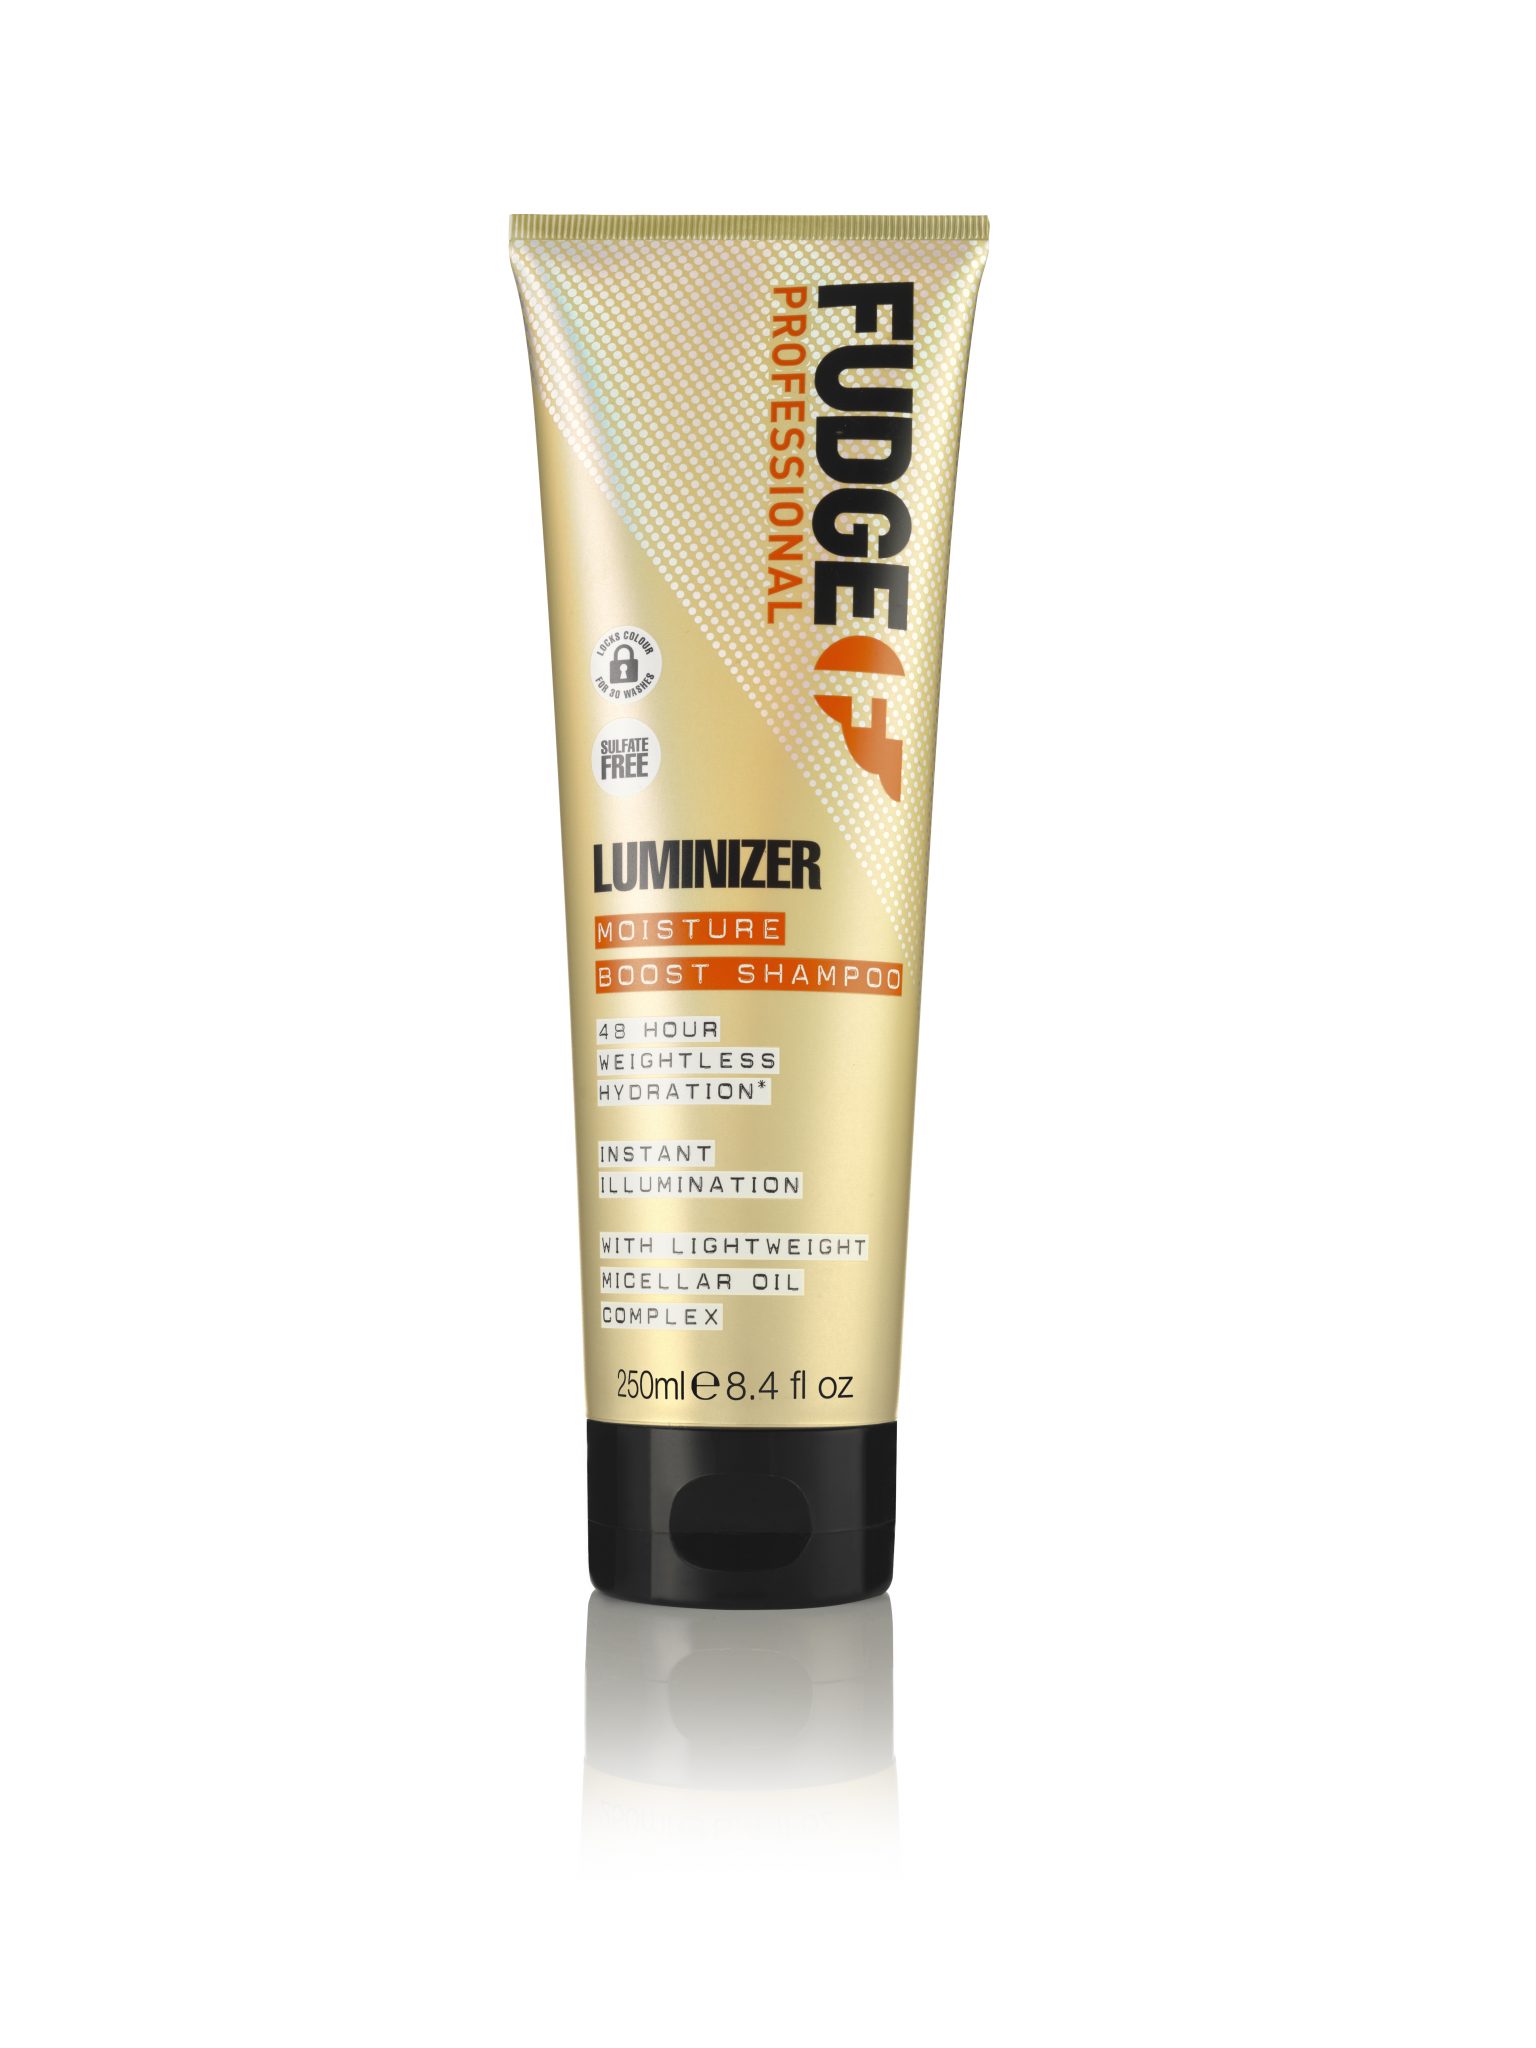 Fudge Luminizer Shampoo 250ml - Hair products New Zealand | Nation wide  hairdressing & hair care group